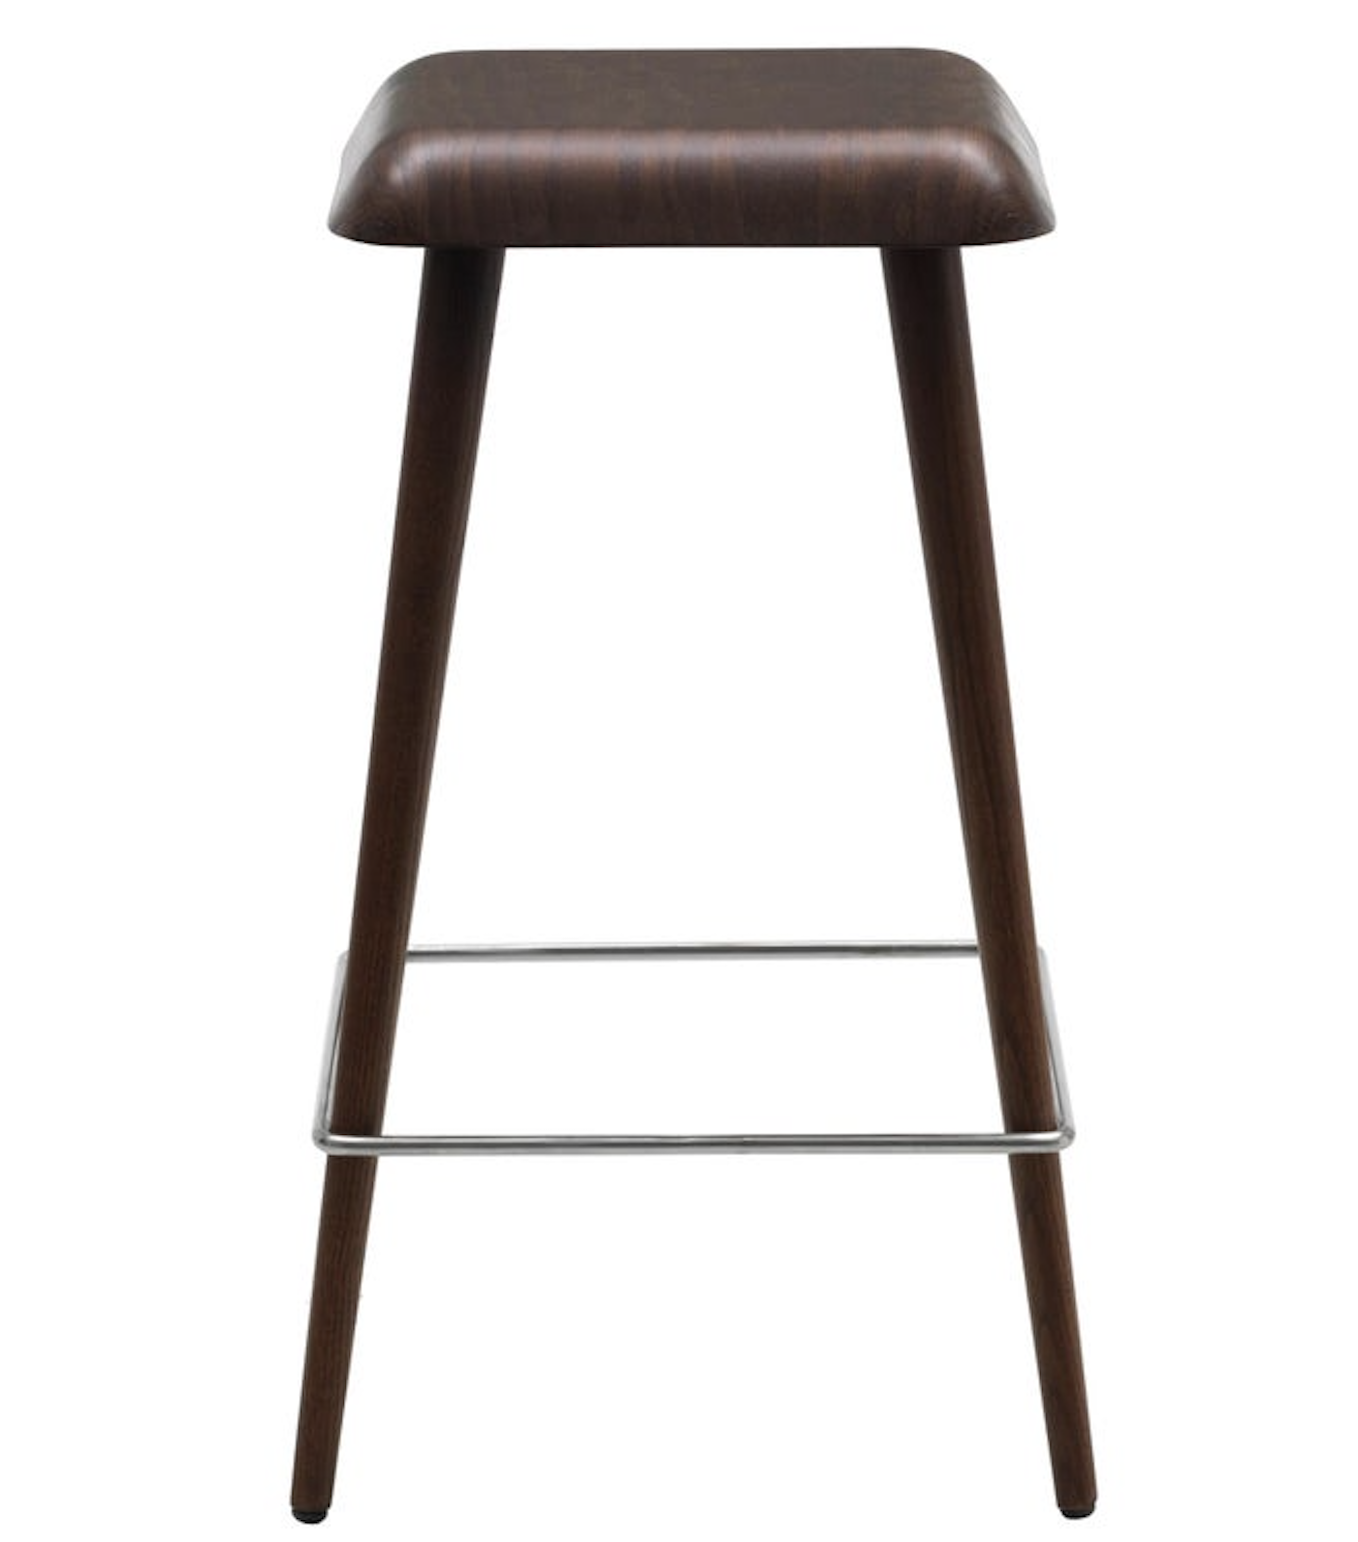 Product Image daddy long legs stool